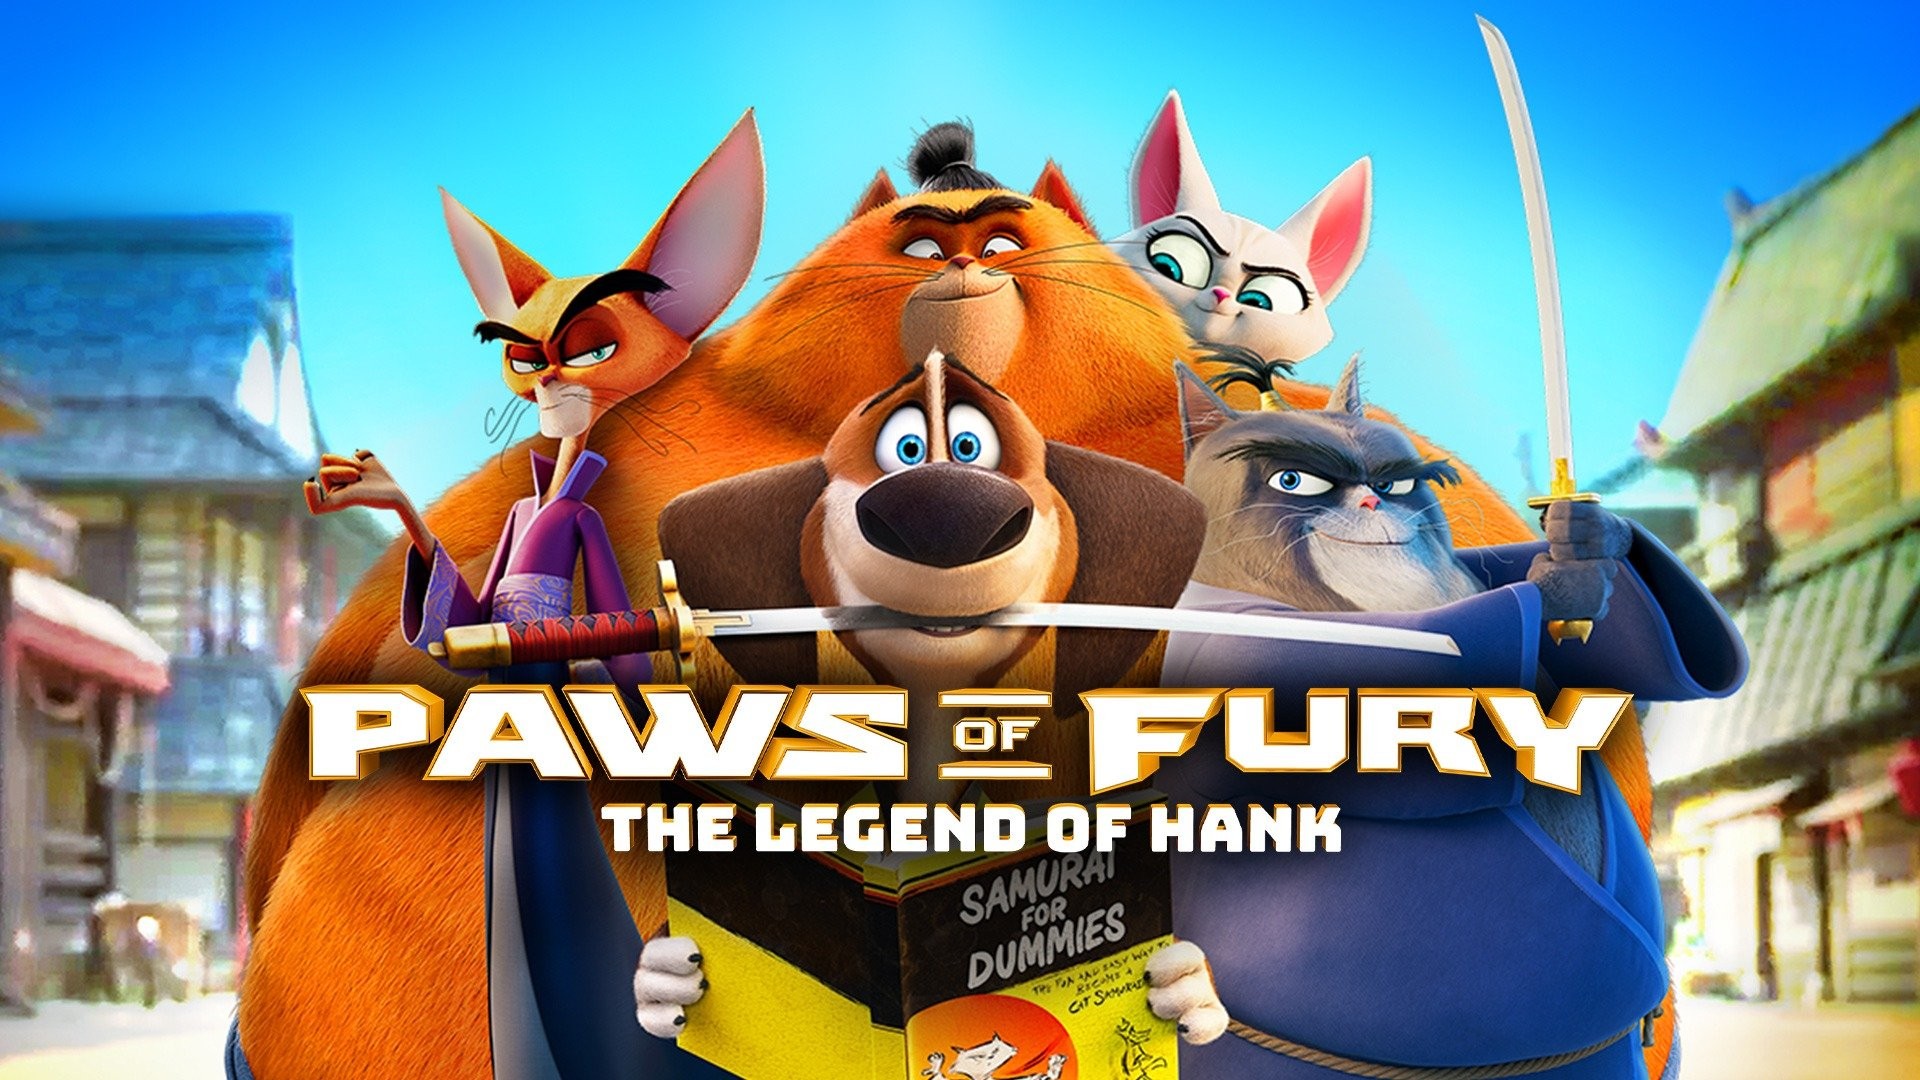 PAWS OF FURY, Official Trailer